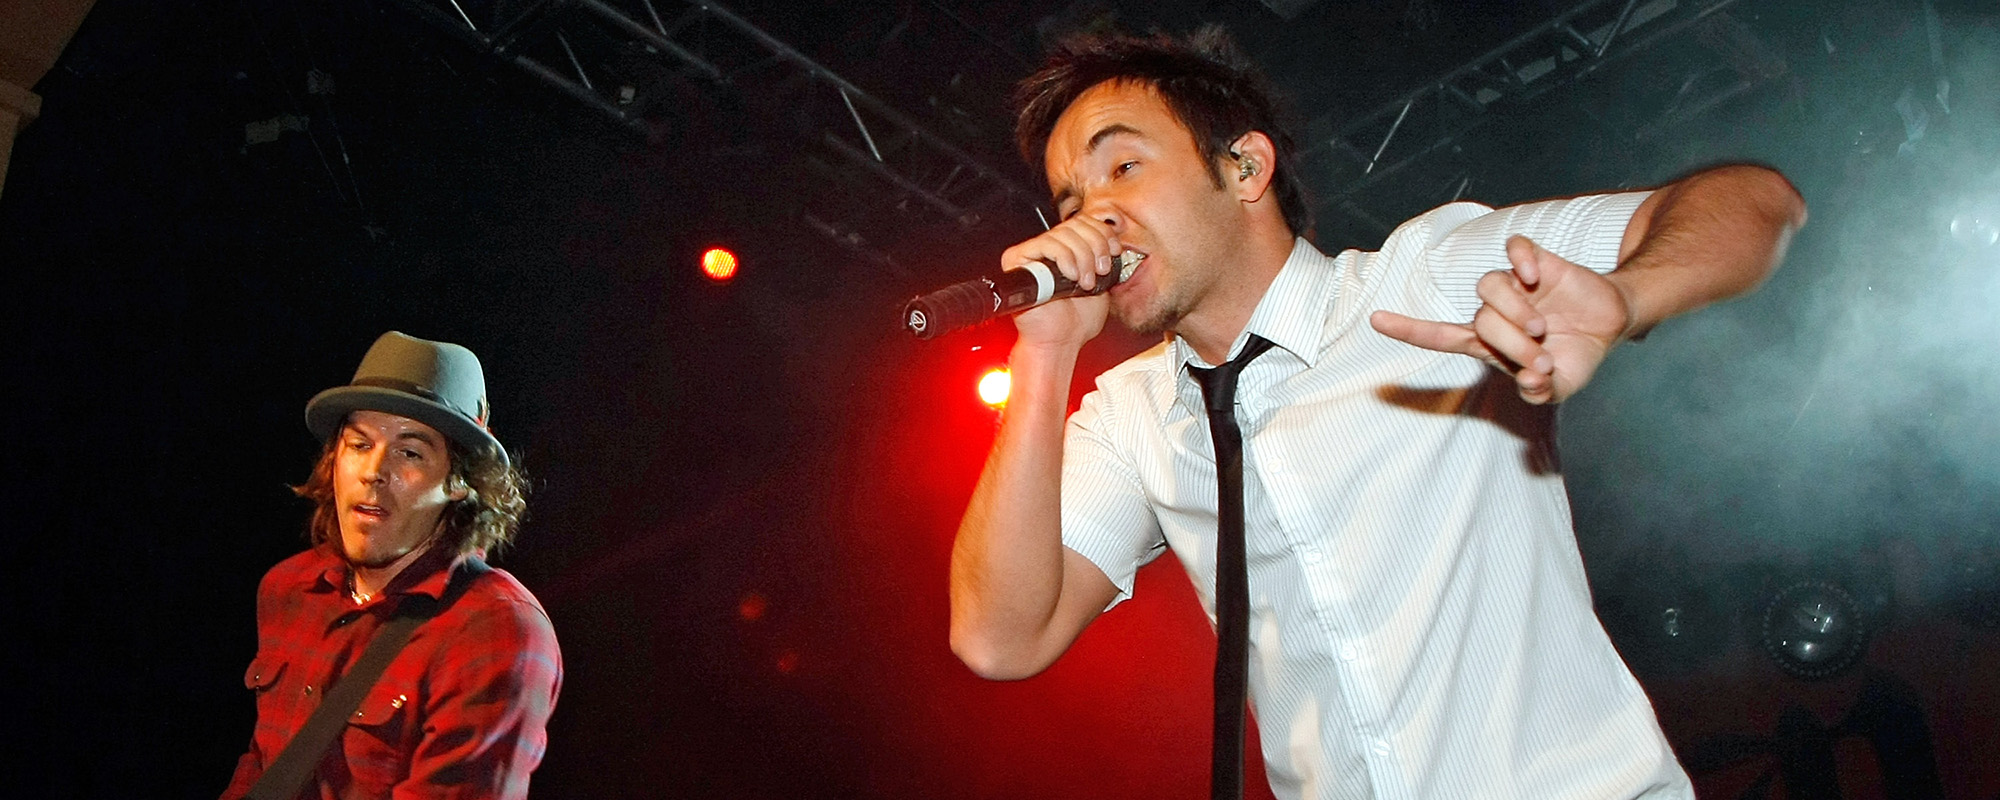 Dan Estrin on the Future of Hoobastank: “We Would Love to Put Music Out”